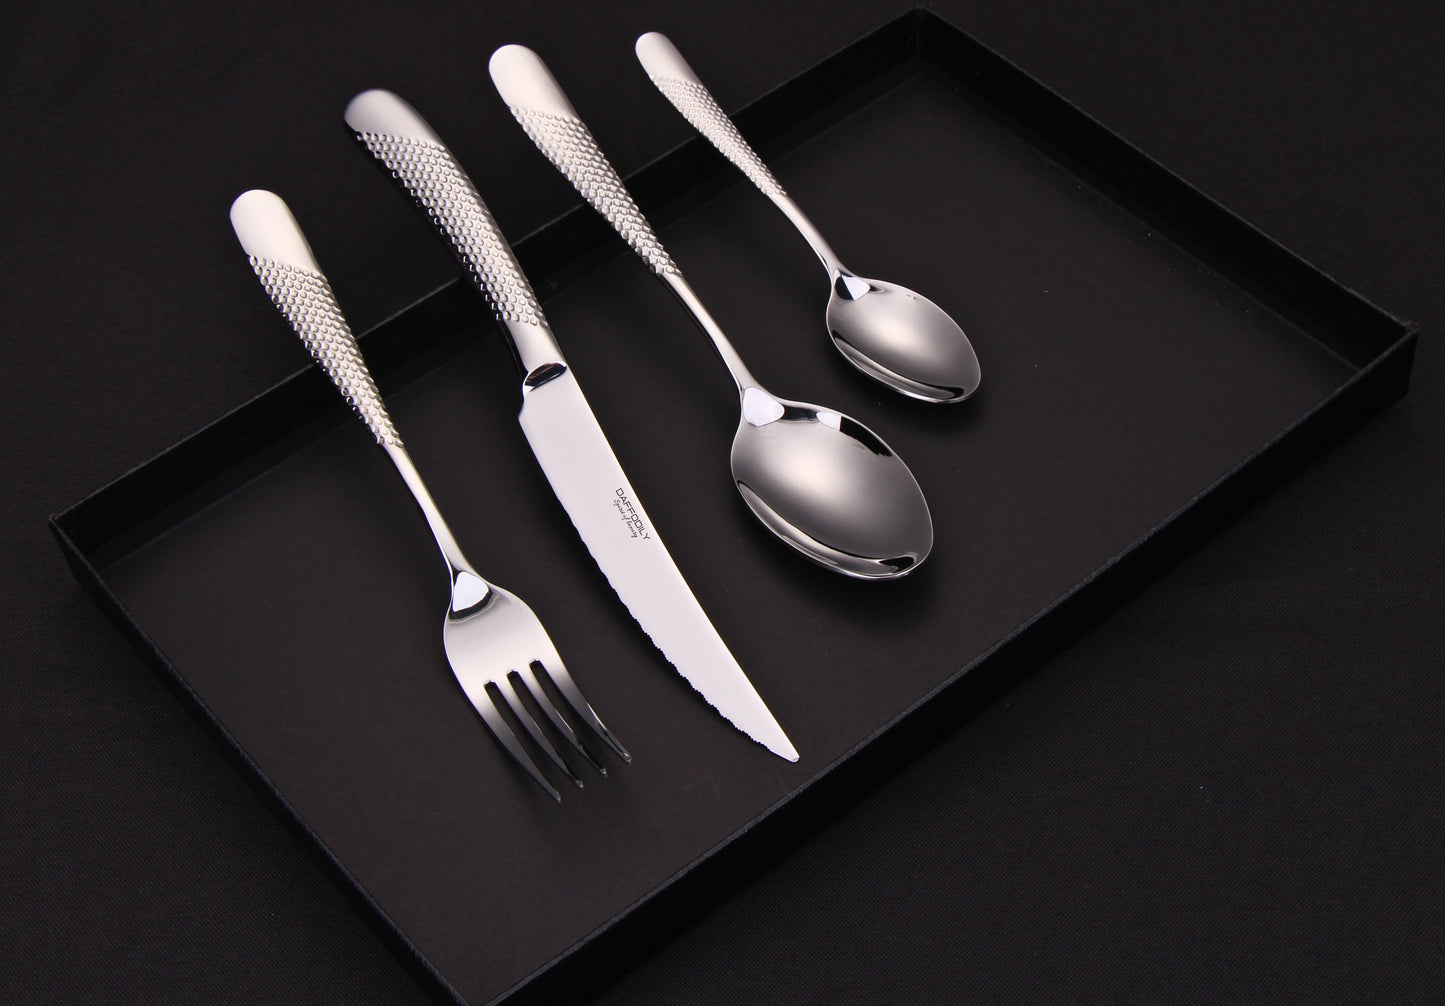 Classic silver cutlery set with intricate detailing